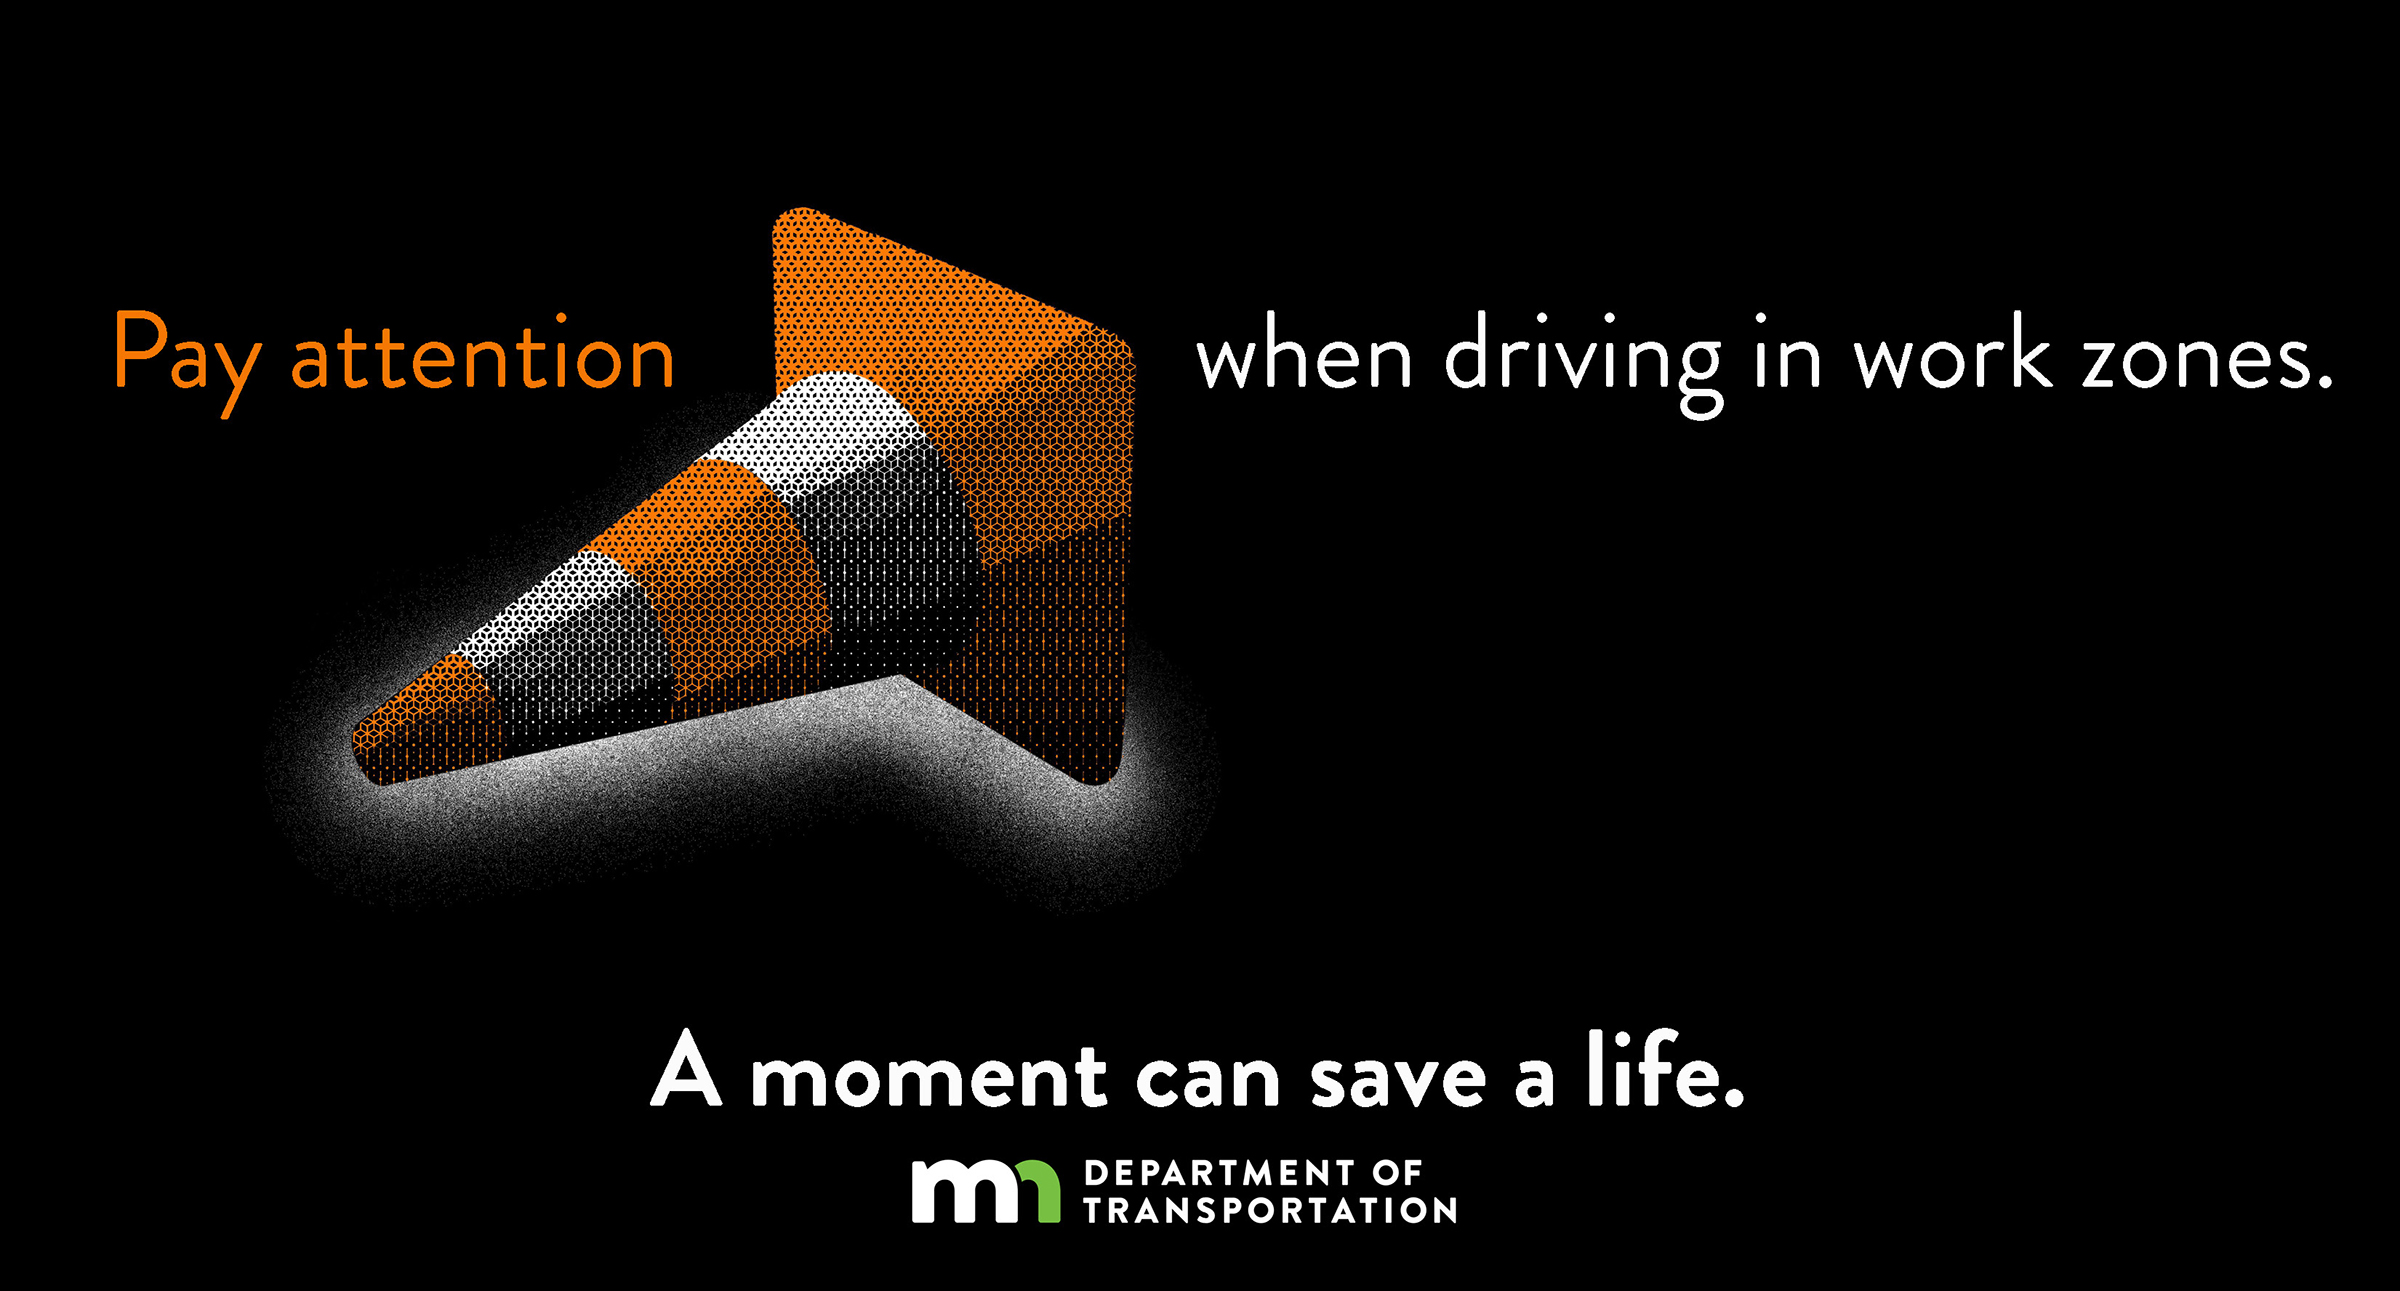 Pay attention when driving in work zones. A moment can save a life.